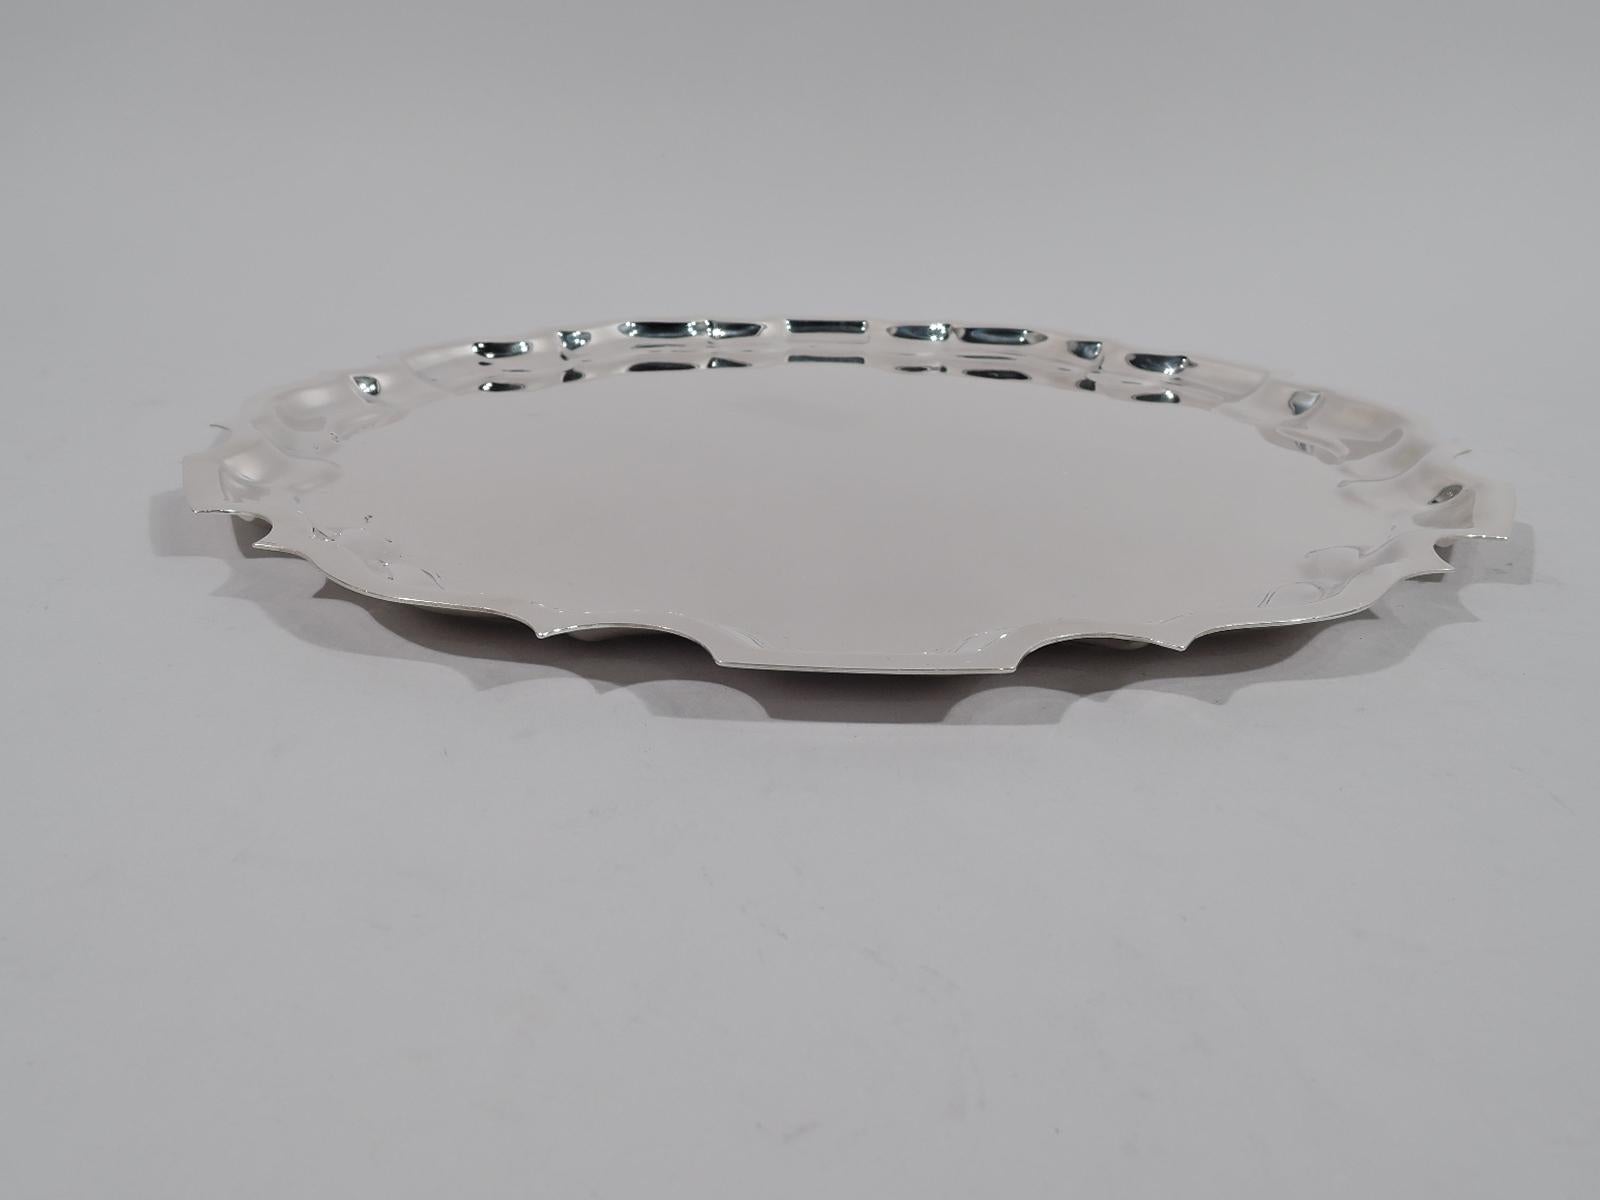 Traditional Georgian sterling silver tray. Made by Graff, Washbourne & Dunn in New York, circa 1920. Round with curvilinear piecrust rim. Fully marked and numbered G63. Heavy weight: 22.5 troy ounces.